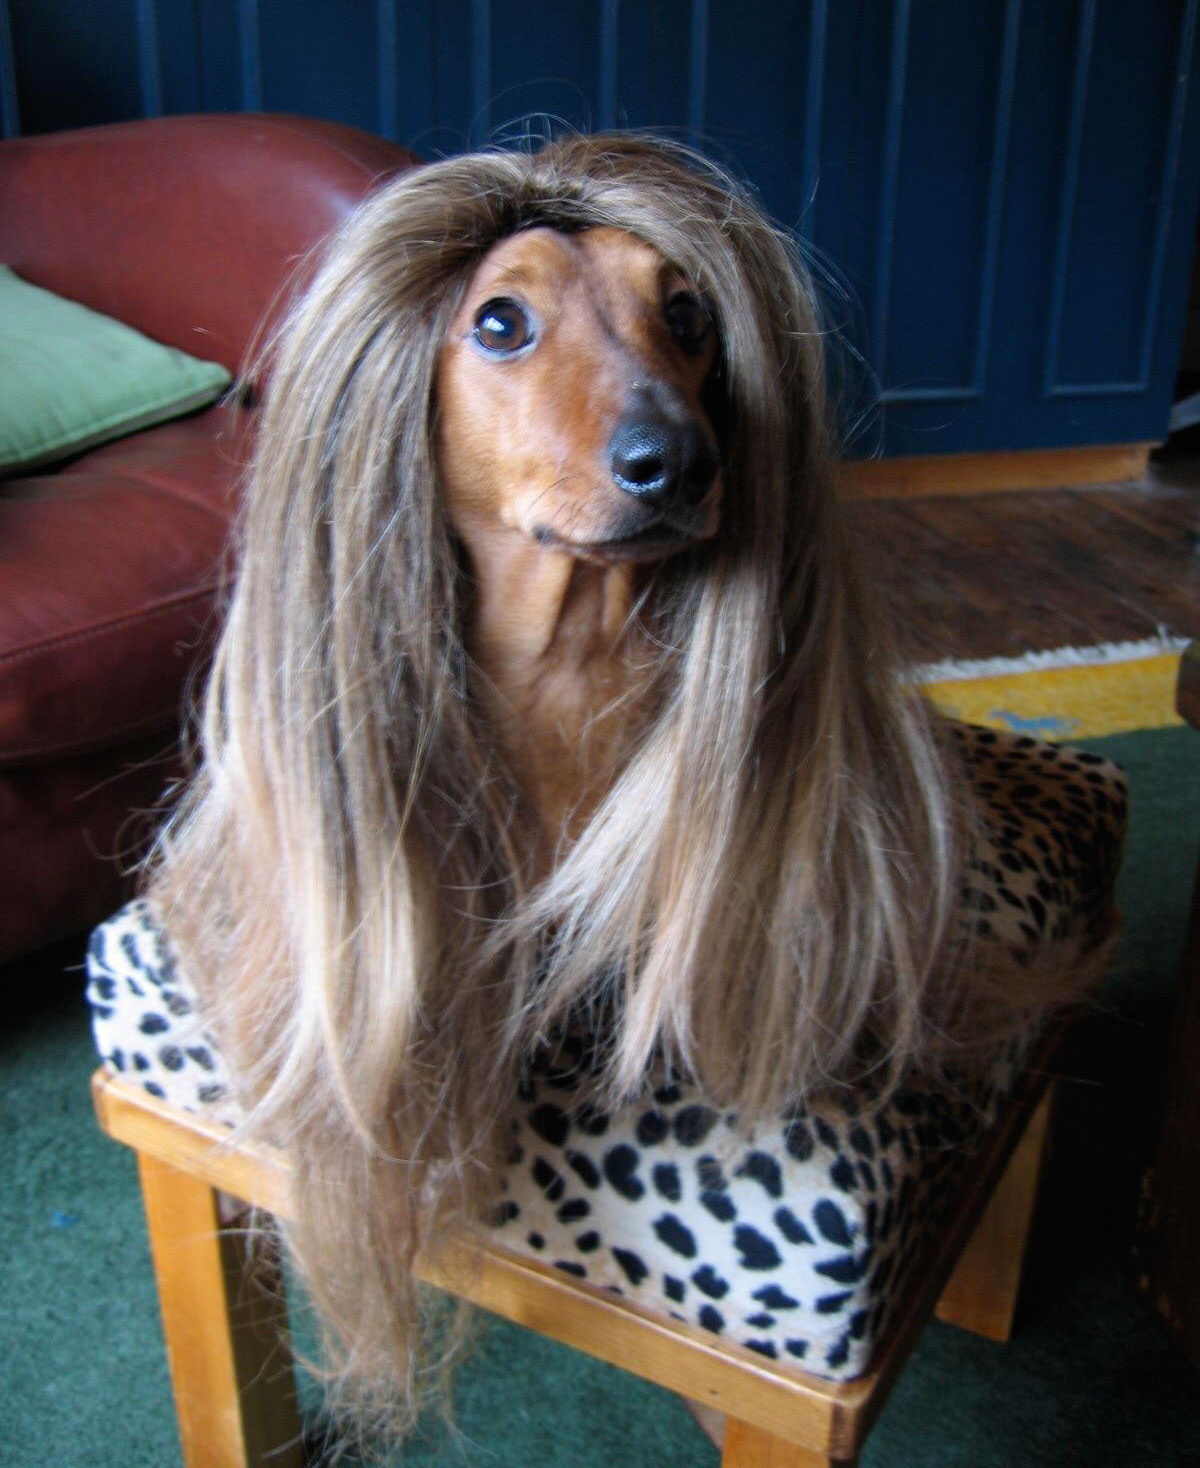 My Dachshund looks great in a wig